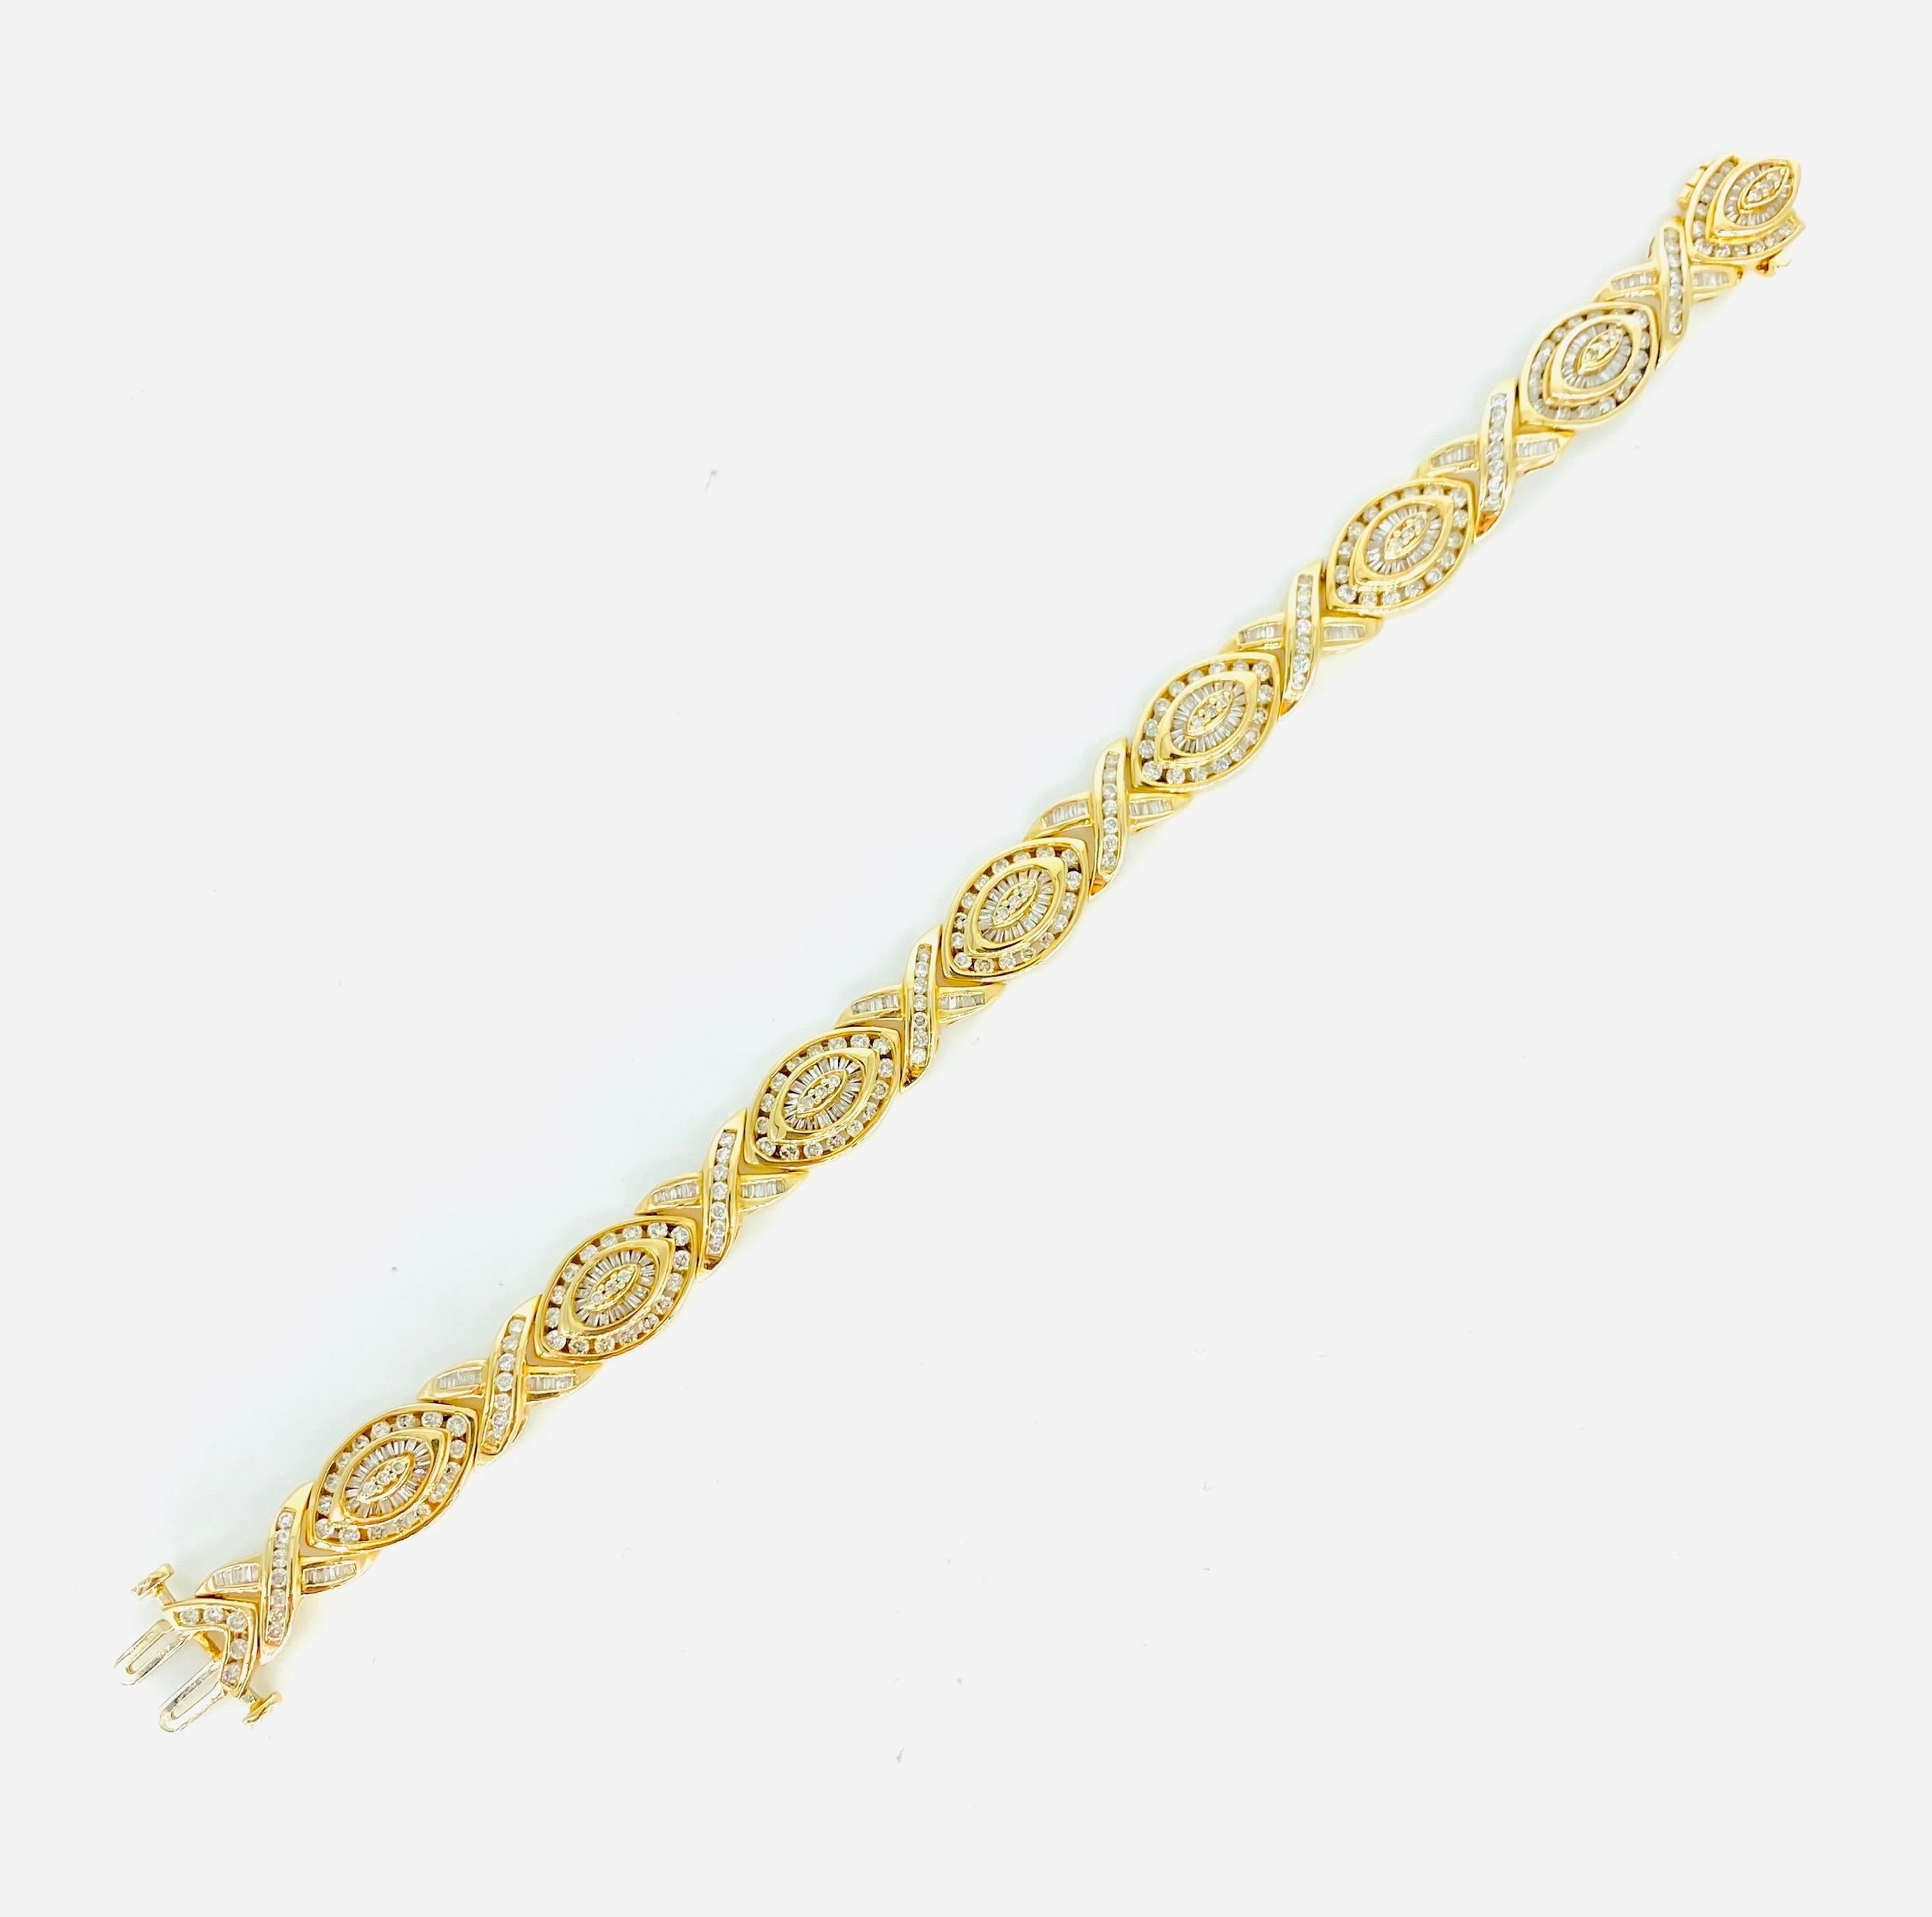 Vintage 9.50 Carat Diamonds XOXO Oval Link Bracelet 14k Gold In Excellent Condition For Sale In Miami, FL